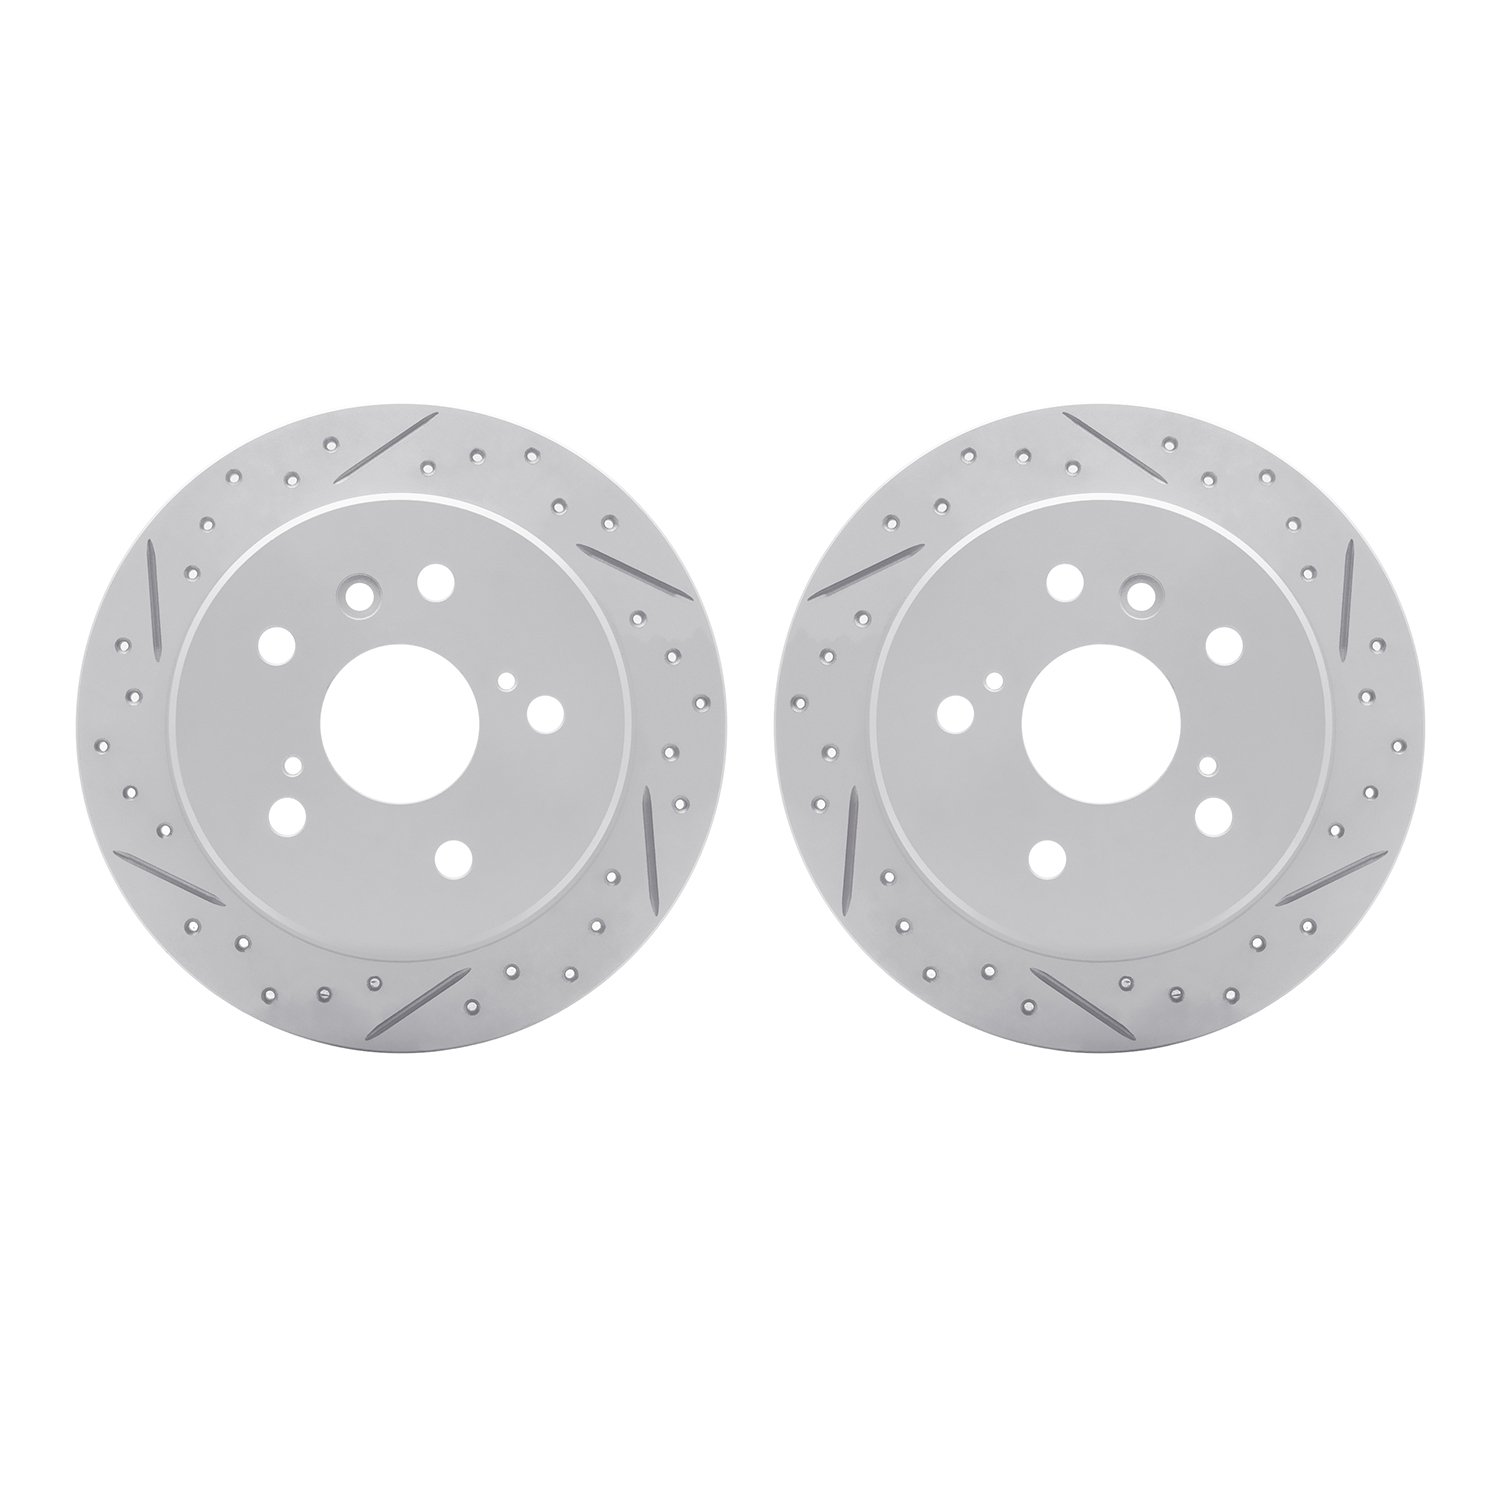 2002-76041 Geoperformance Drilled/Slotted Brake Rotors, 1992-2003 Lexus/Toyota/Scion, Position: Rear